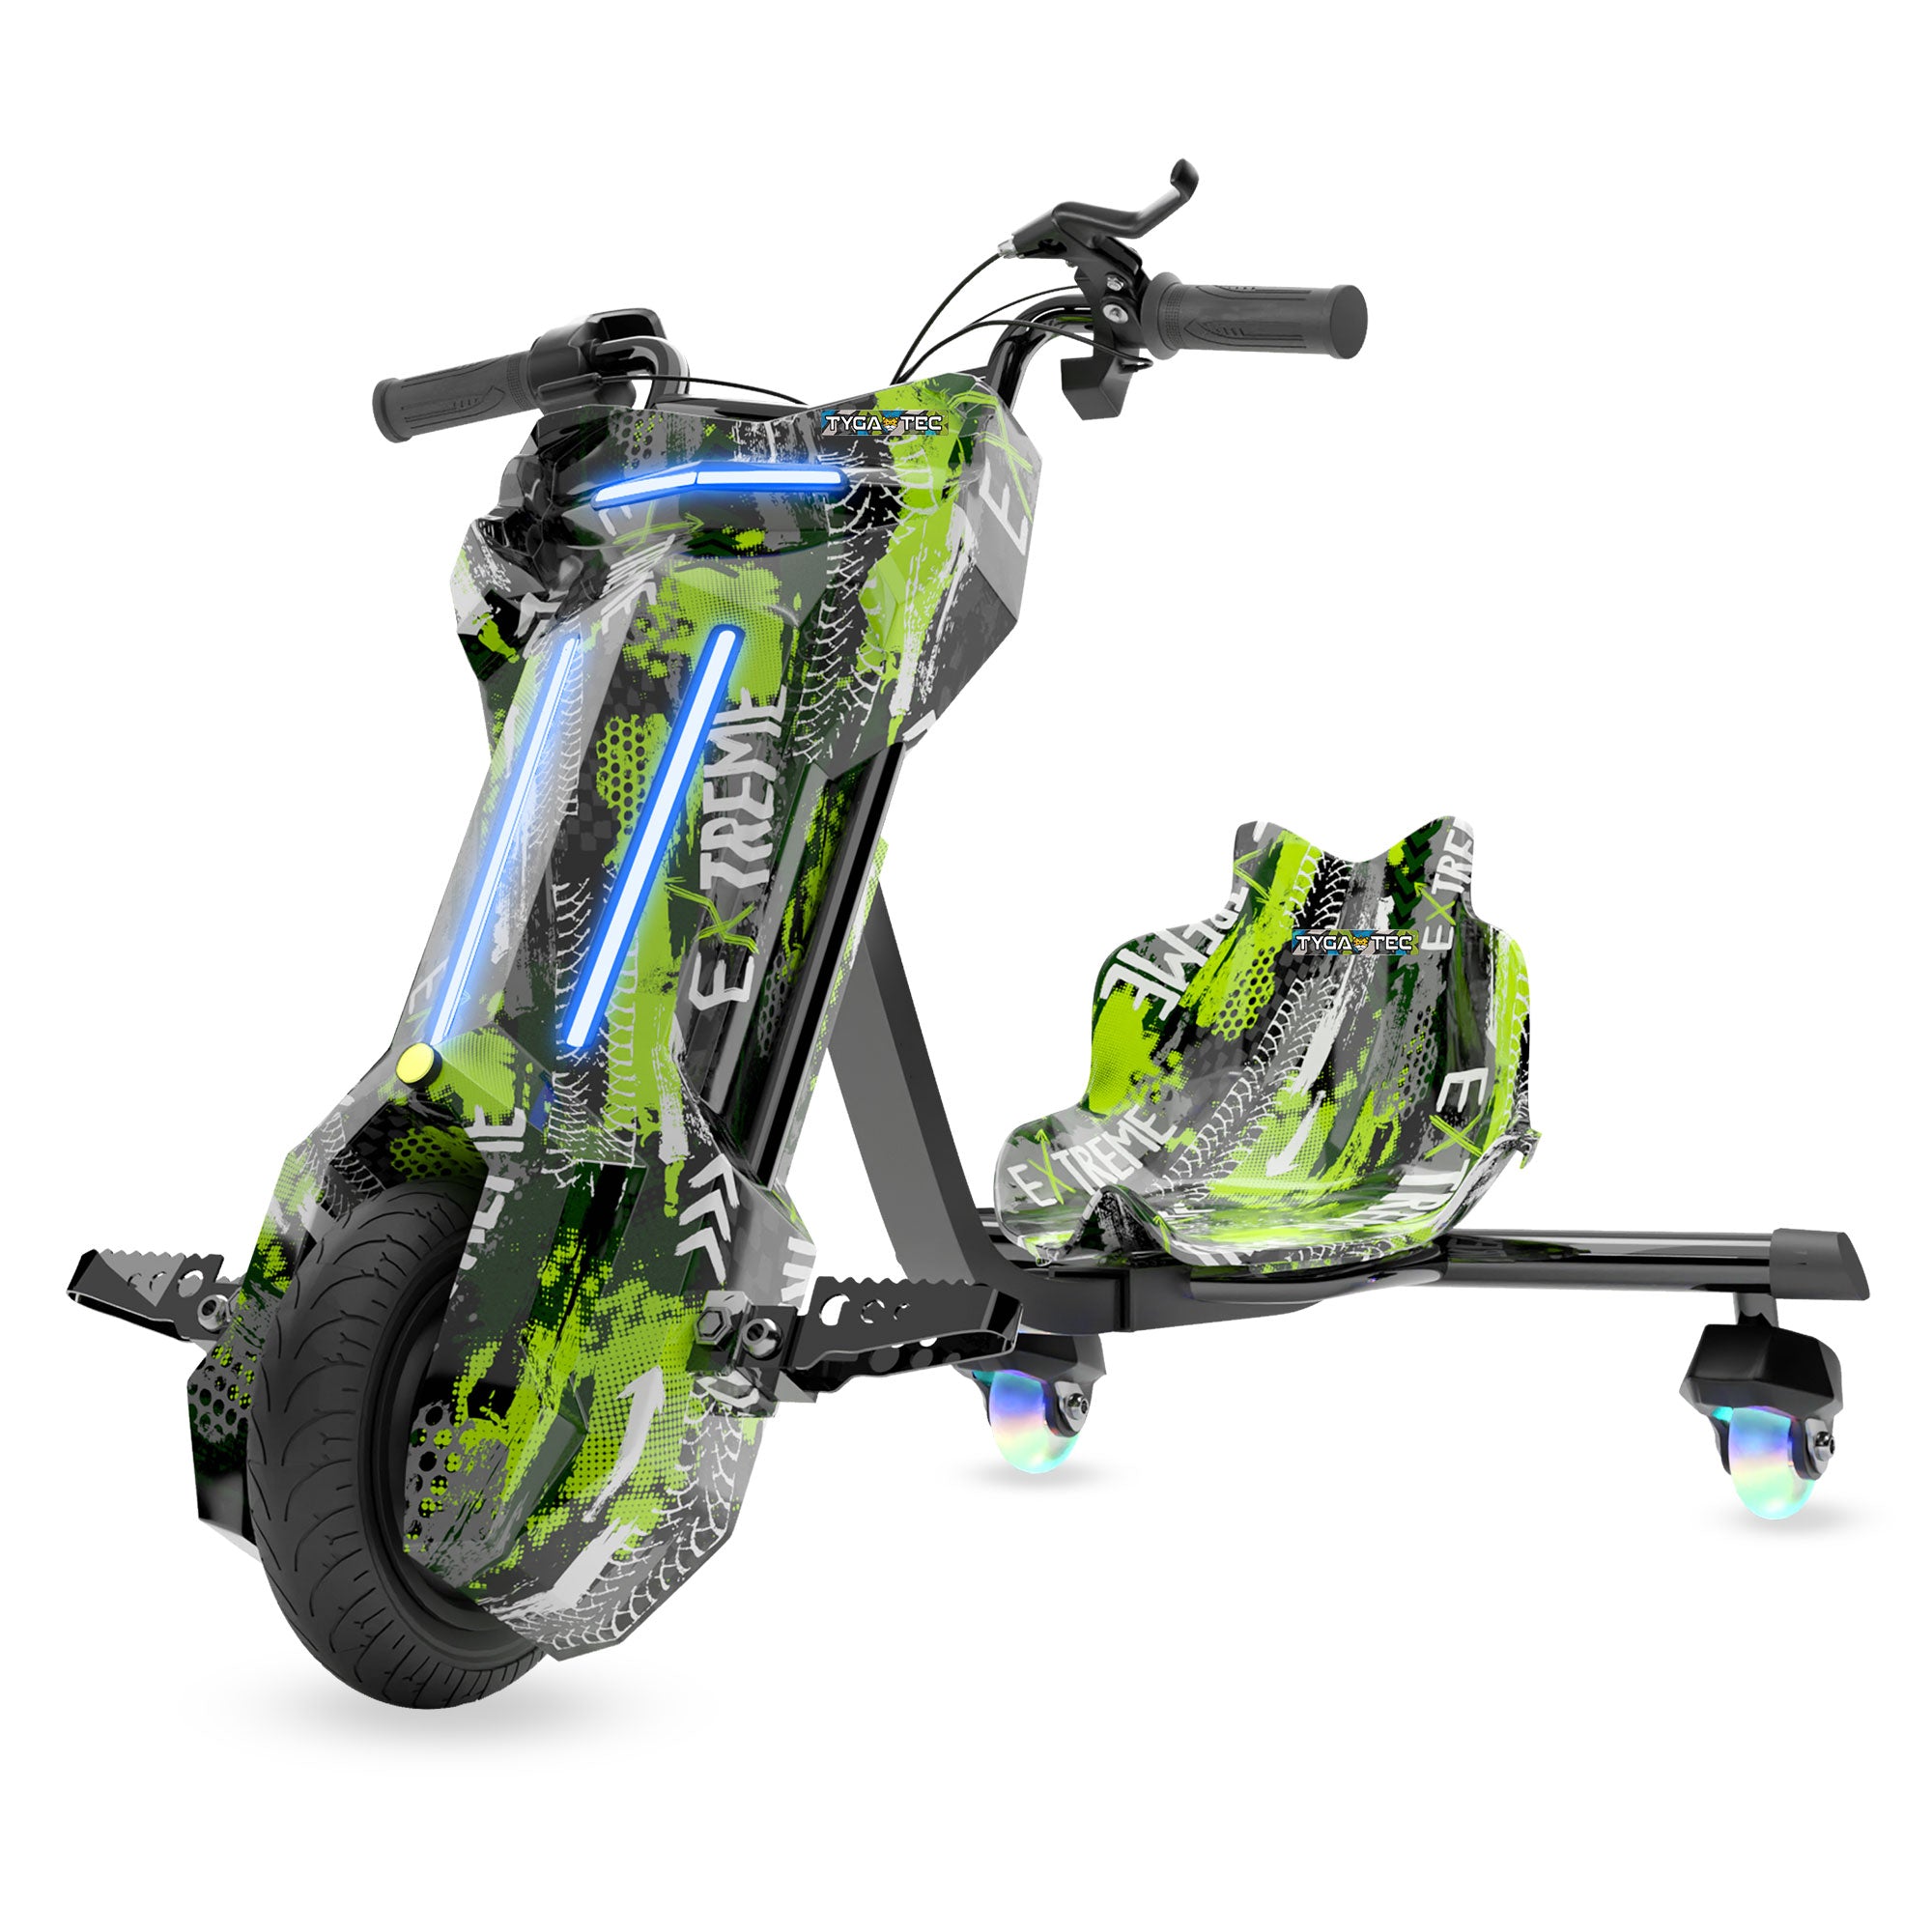 TYGATEC T9 3 WHEEL ELECTRIC 360 DRIFTER FOR KIDS AND ADULTS WITH LED LIGHT AND BLUETOOTH (Extreme Green color)